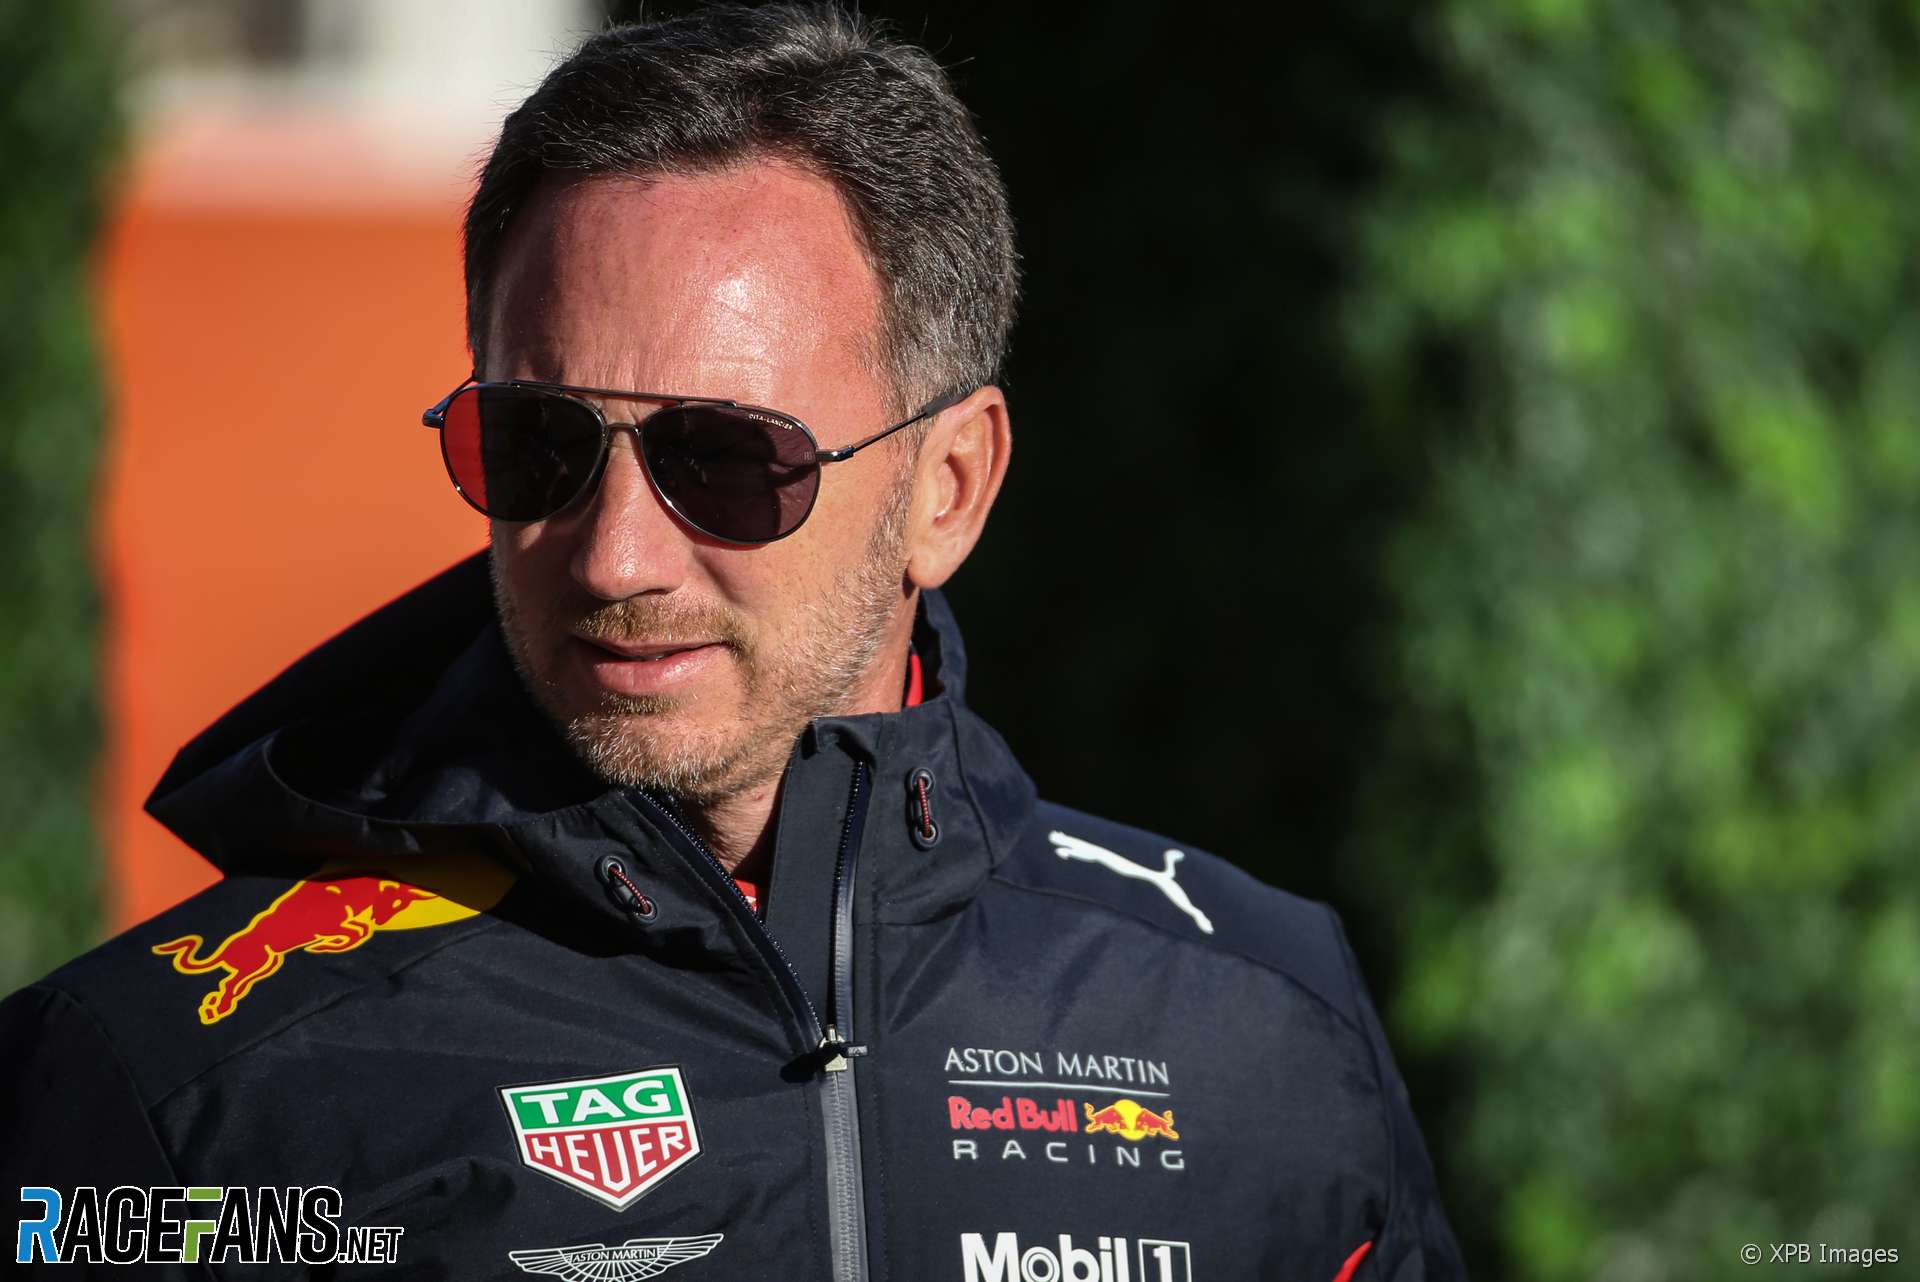 Christian Horner, Circuit of the Americas, 2019